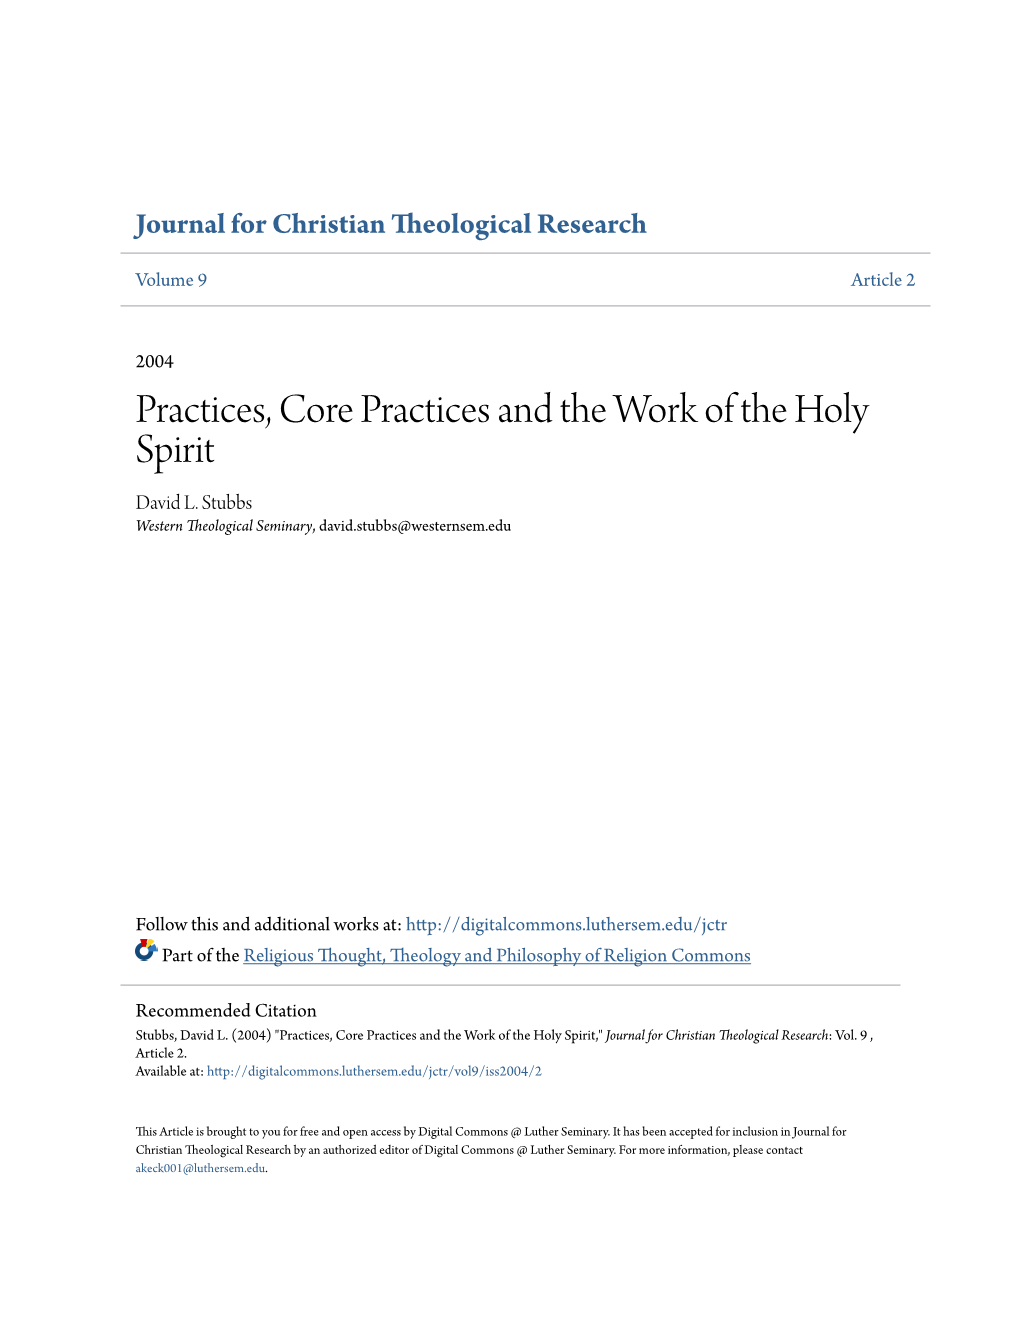 Practices, Core Practices and the Work of the Holy Spirit David L